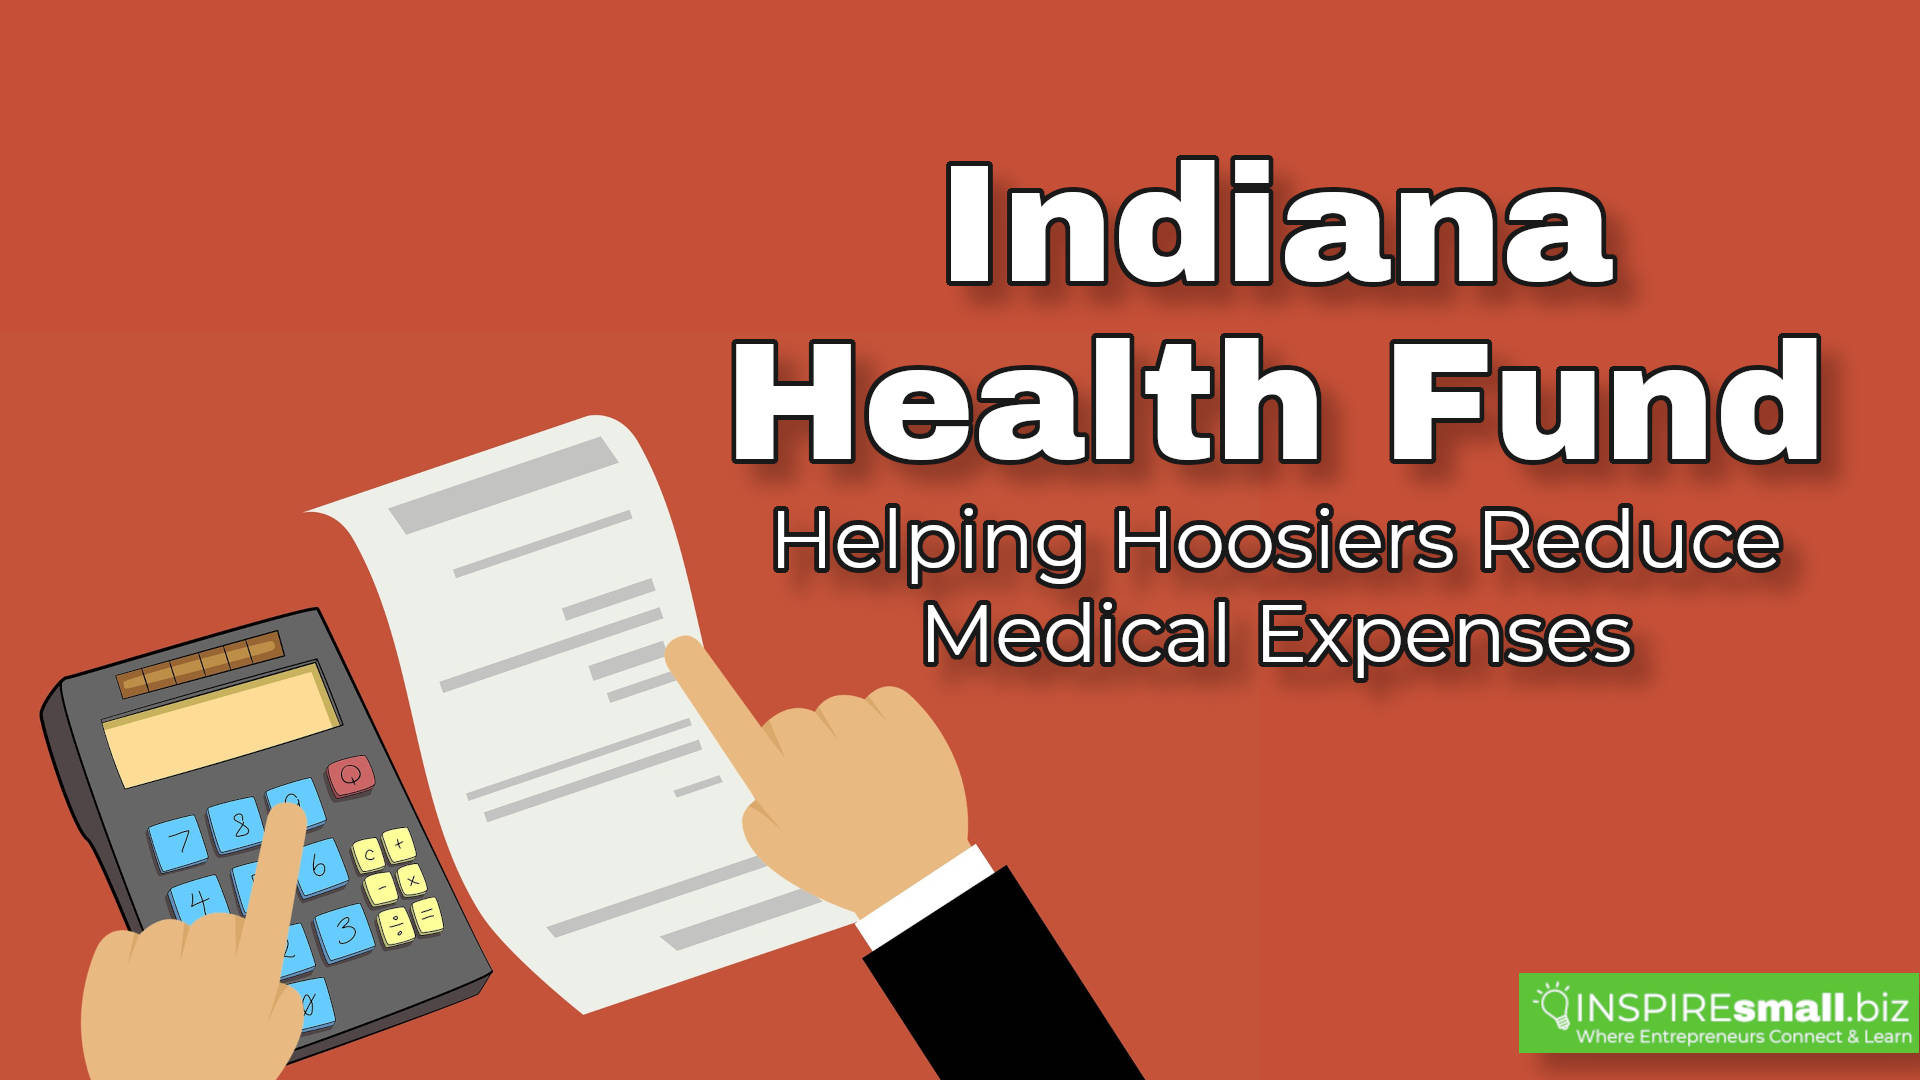 Indiana Health Fund - Helping Hoosiers Reduce Medical Expenses - Hosted by INSPIREsmall.biz